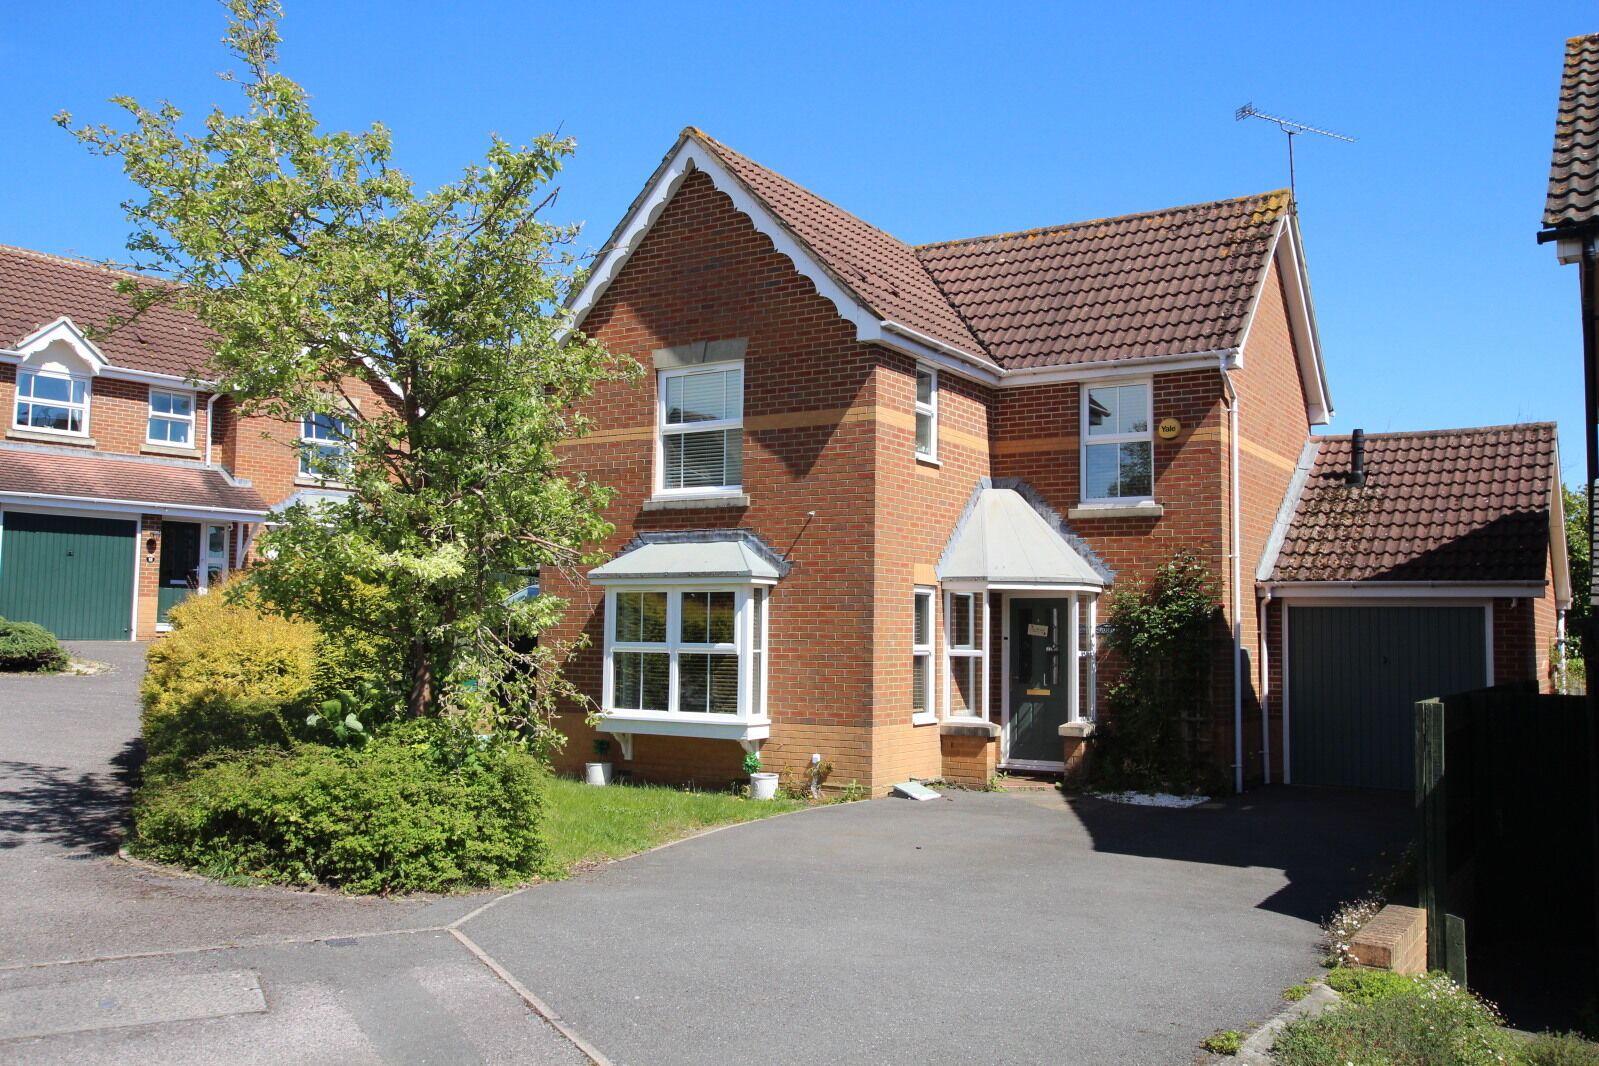 3 bedroom detached house for sale The Knoll, Reading, RG31, main image